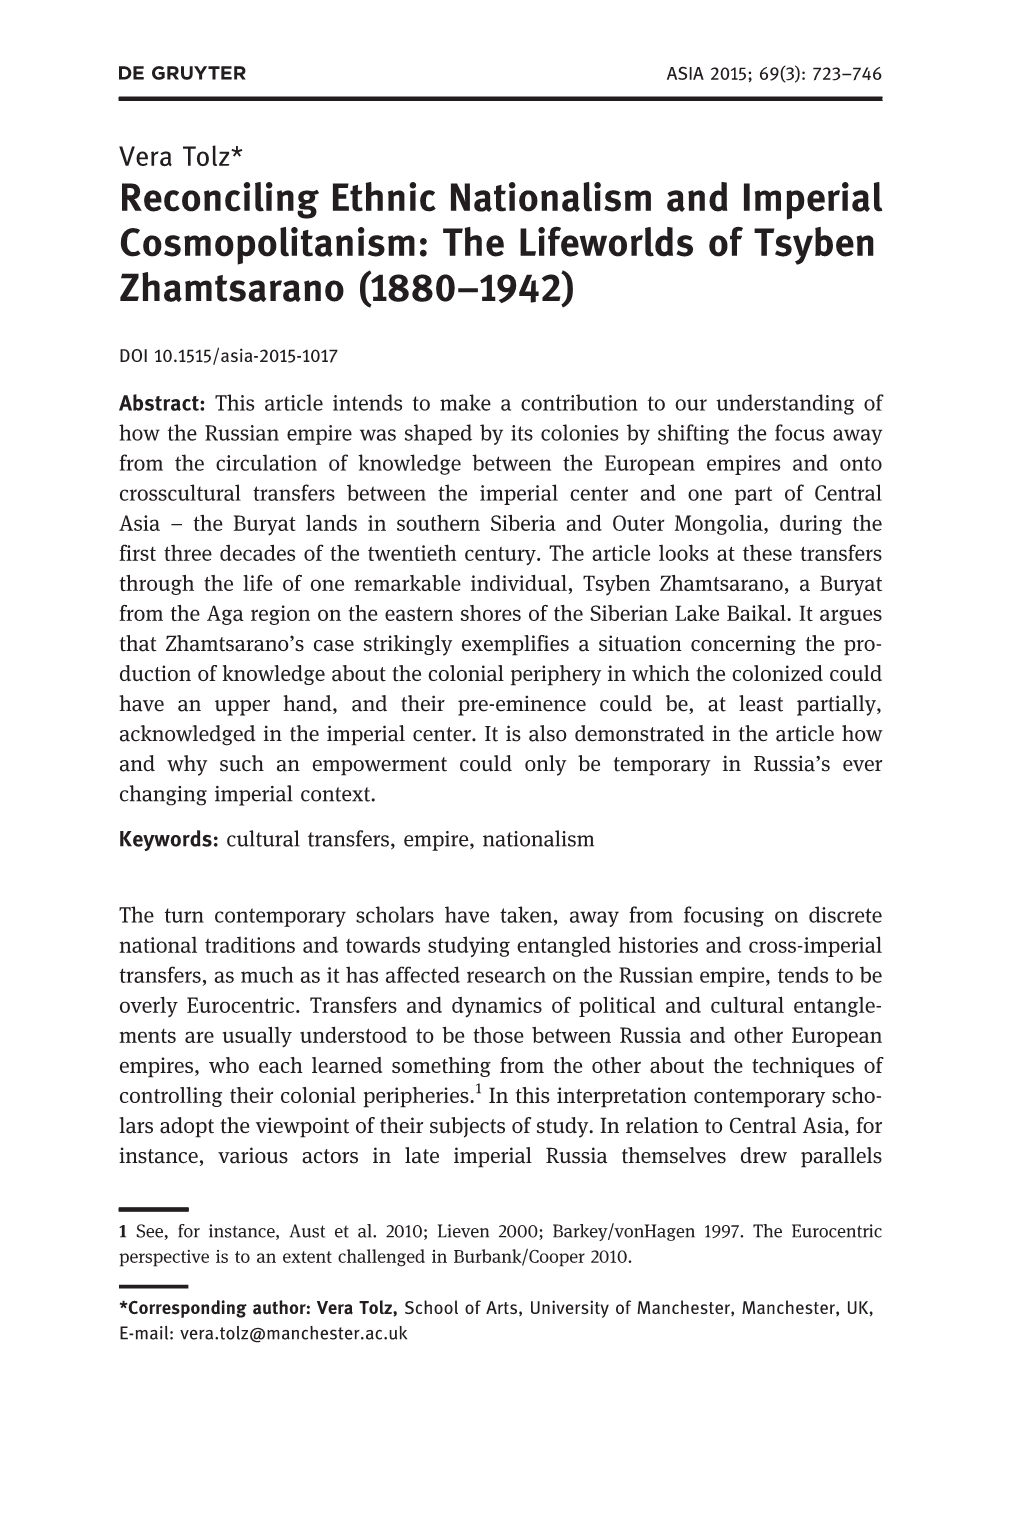 Reconciling Ethnic Nationalism and Imperial Cosmopolitanism: the Lifeworlds of Tsyben Zhamtsarano (1880–1942)